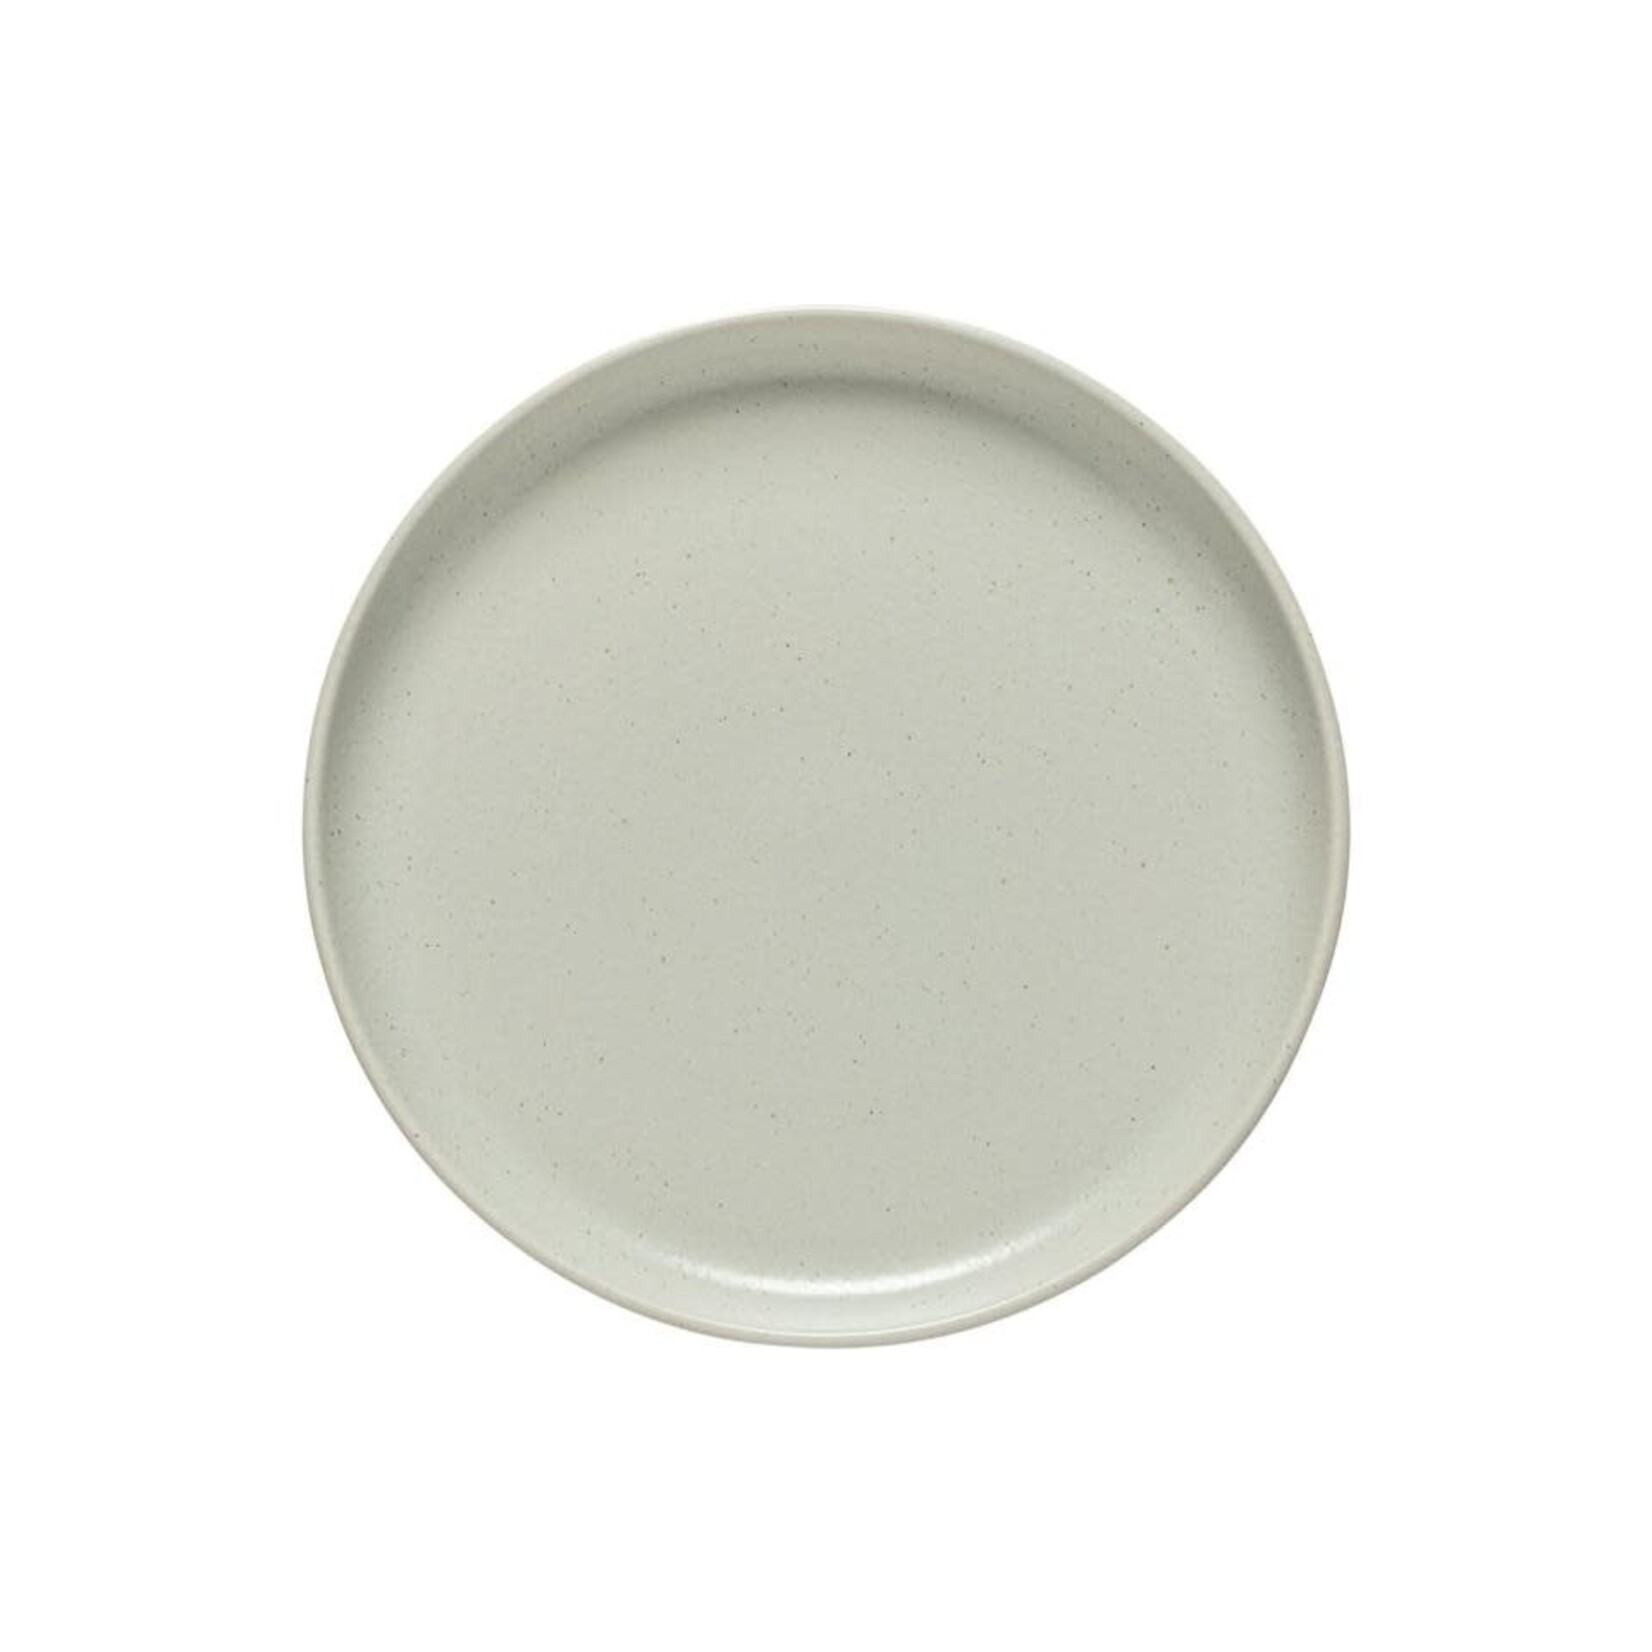 CASAFINA LIVING Pacifica Dinner Plate - Oyster Grey